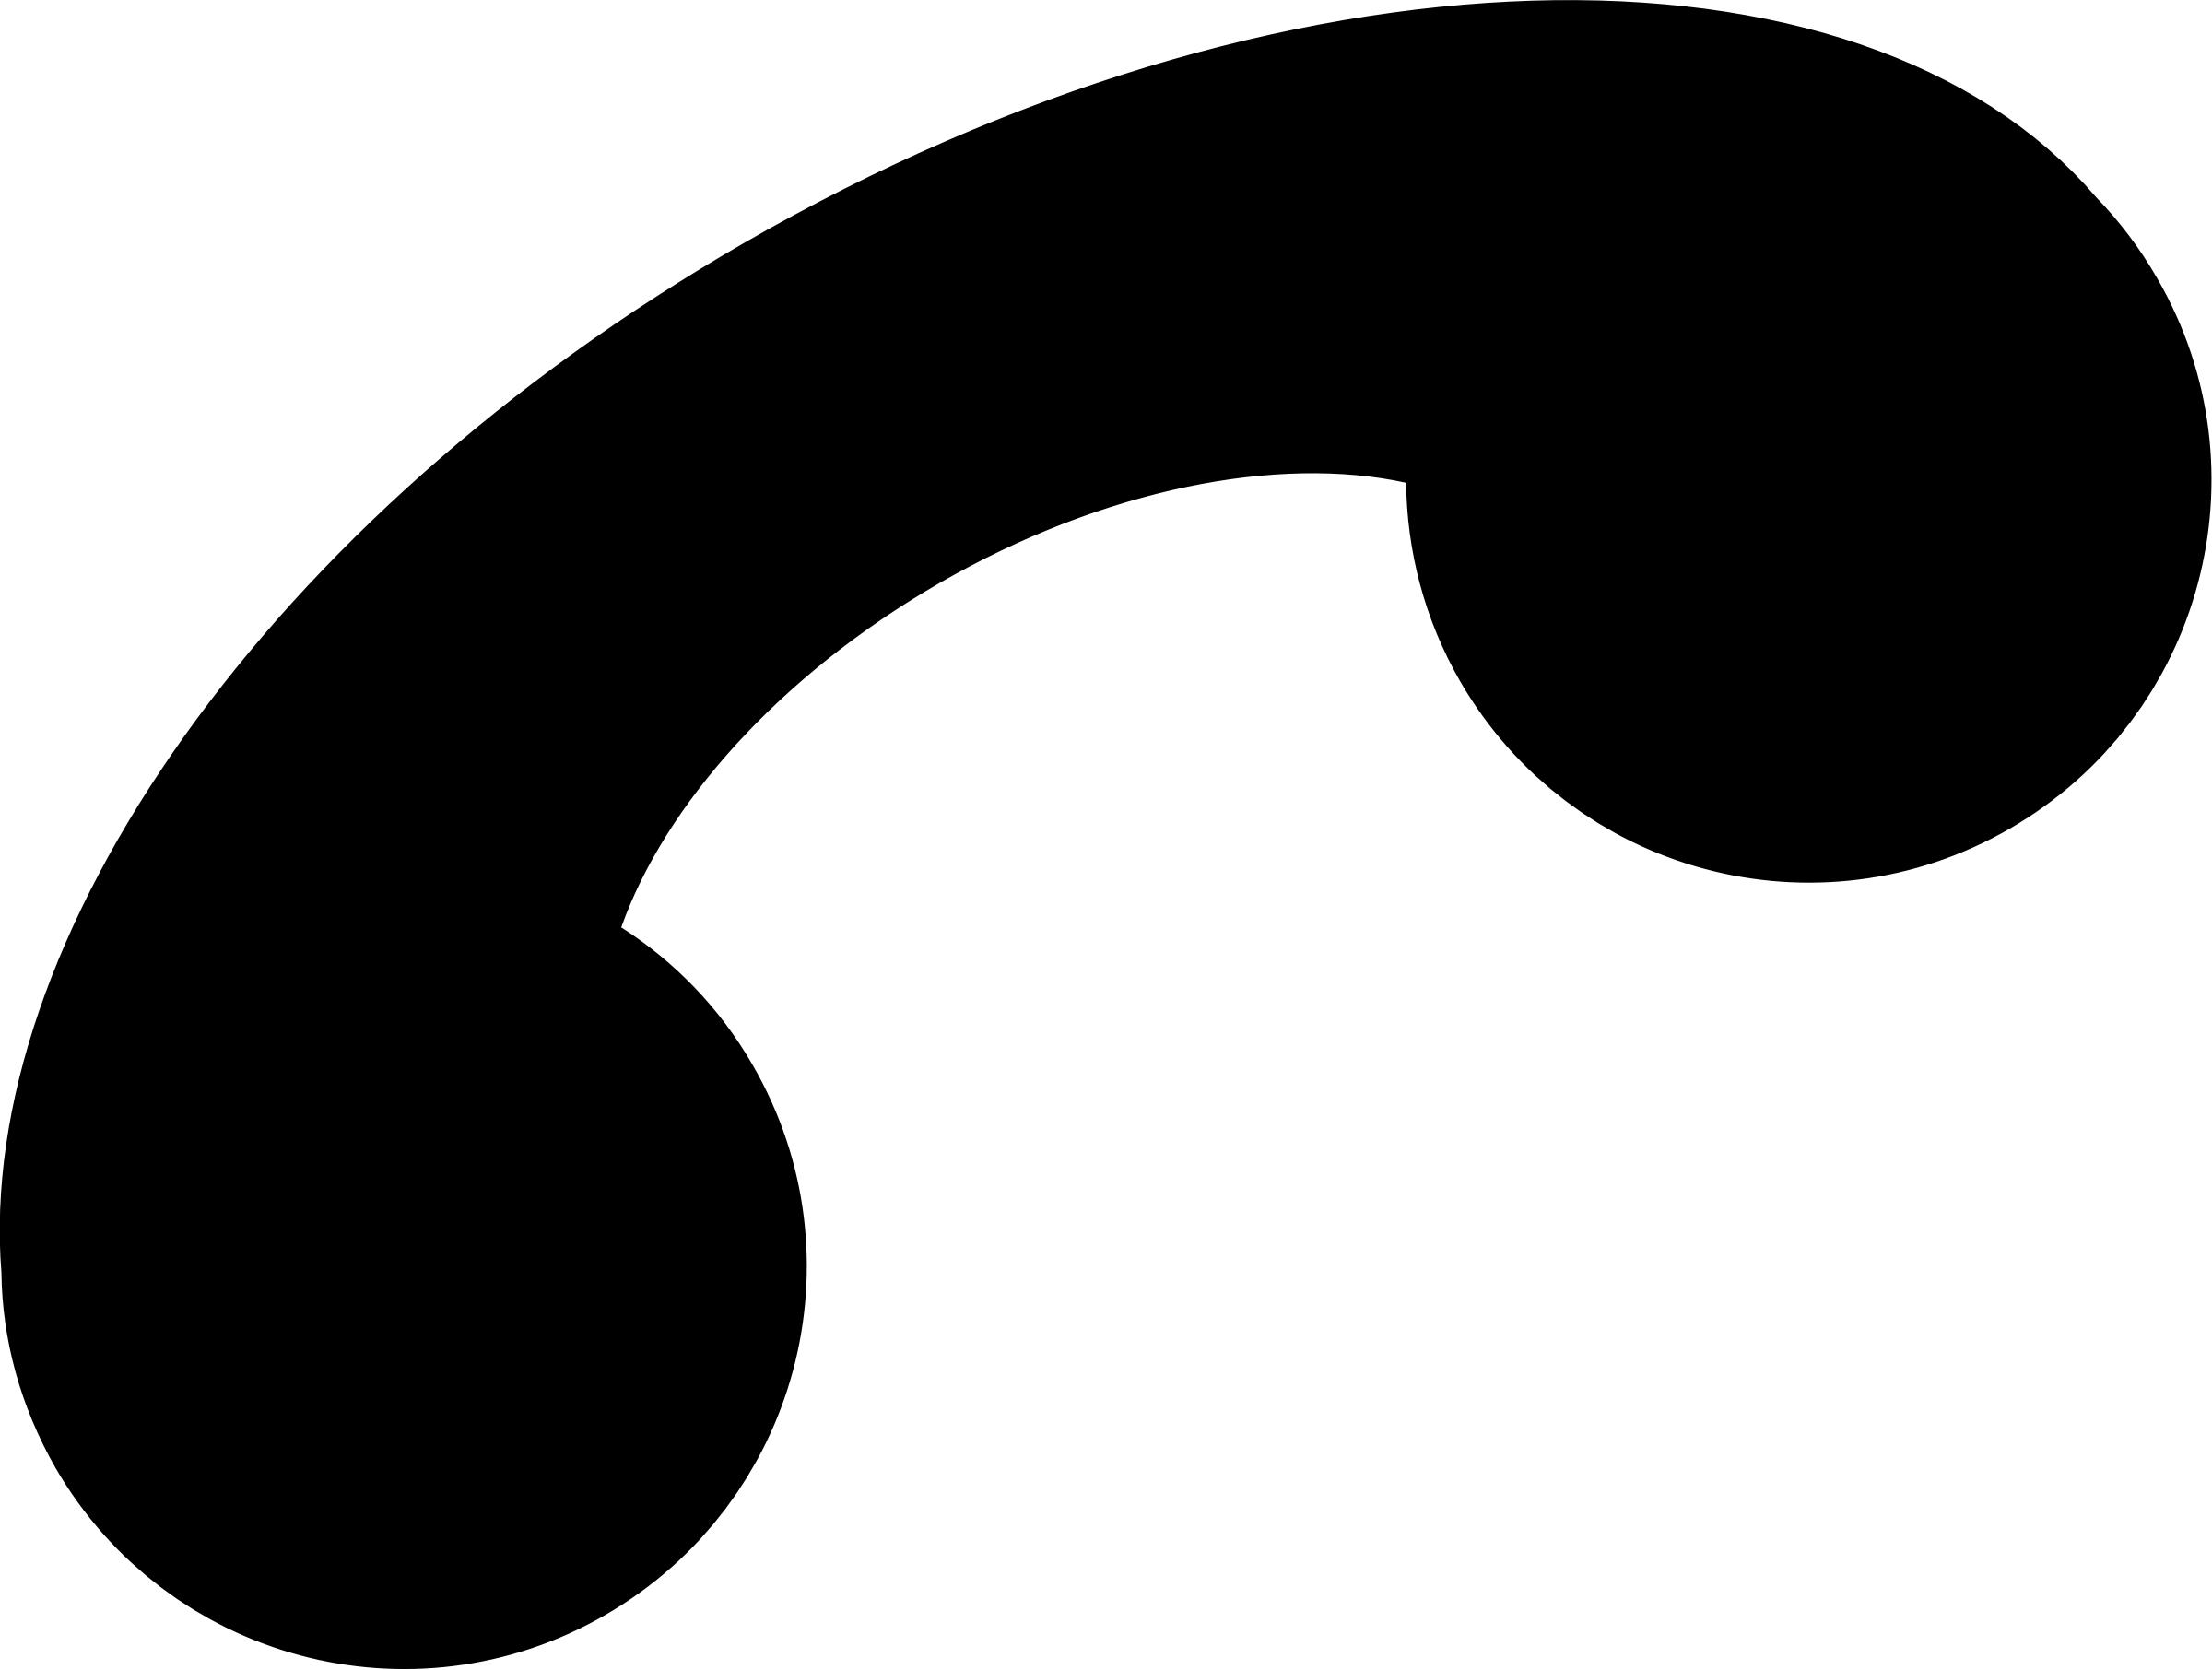 Traditional telephone horn icons